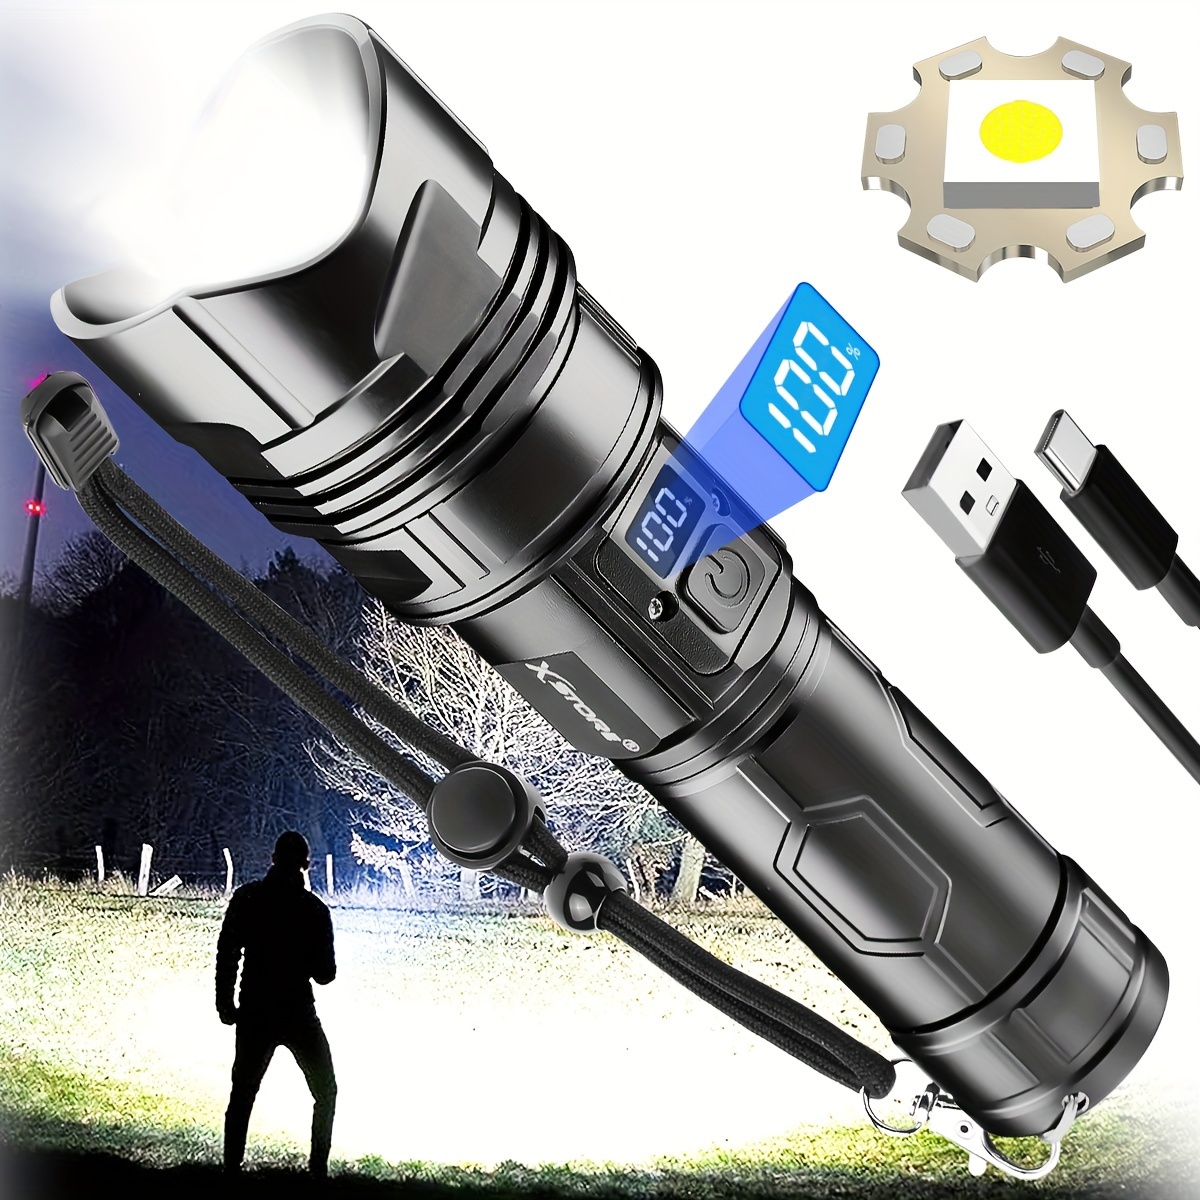 Wuben L50 Torch Outdoor Camping LED Torch 1200 Lumens Hand Lamp